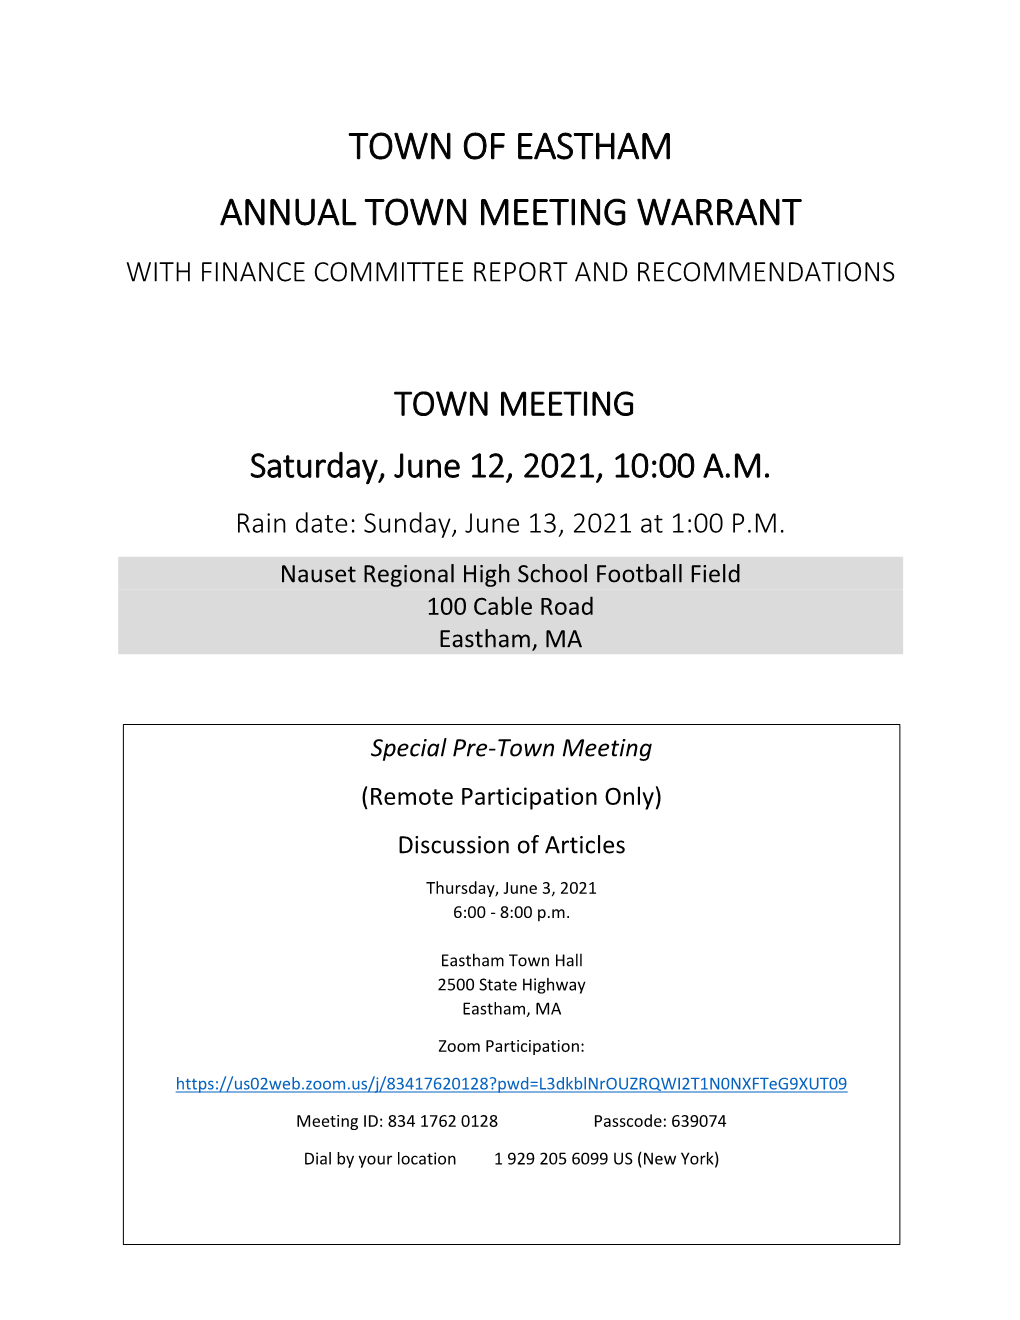 Town of Eastham Annual Town Meeting Saturday, June 12, 2021